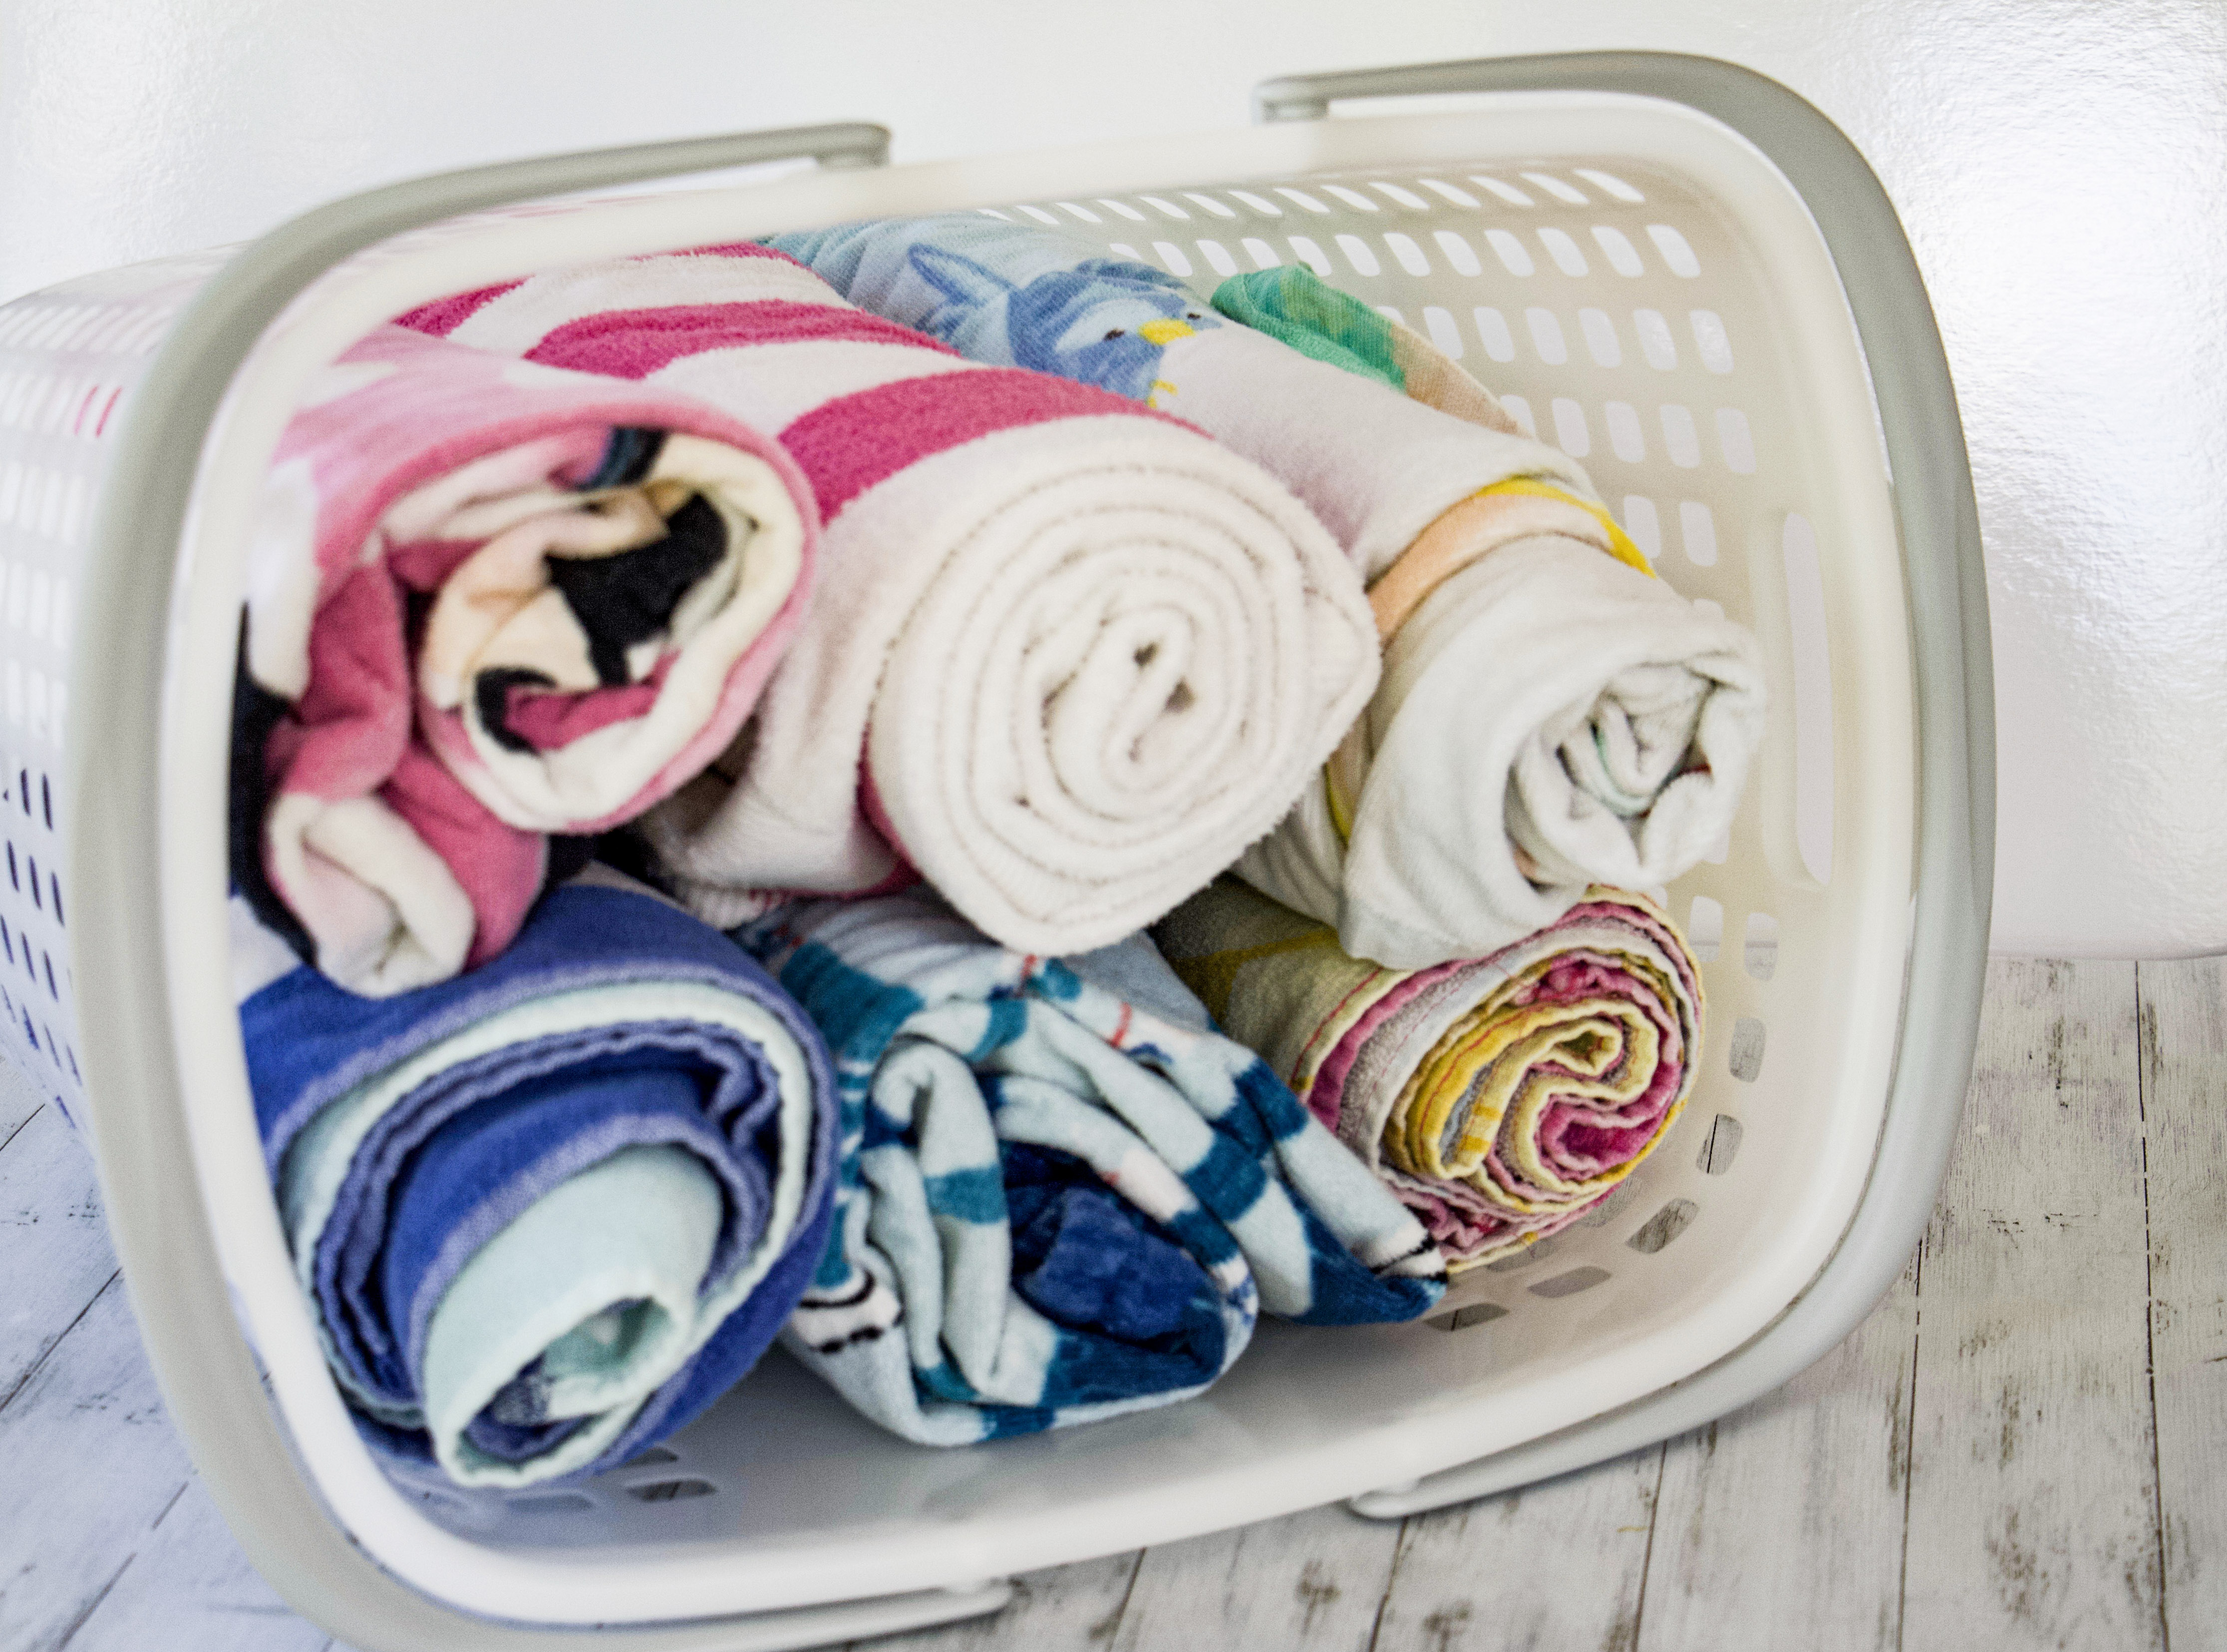 Beach towels rolled up in a basket to represent how to get organized for summer #summer